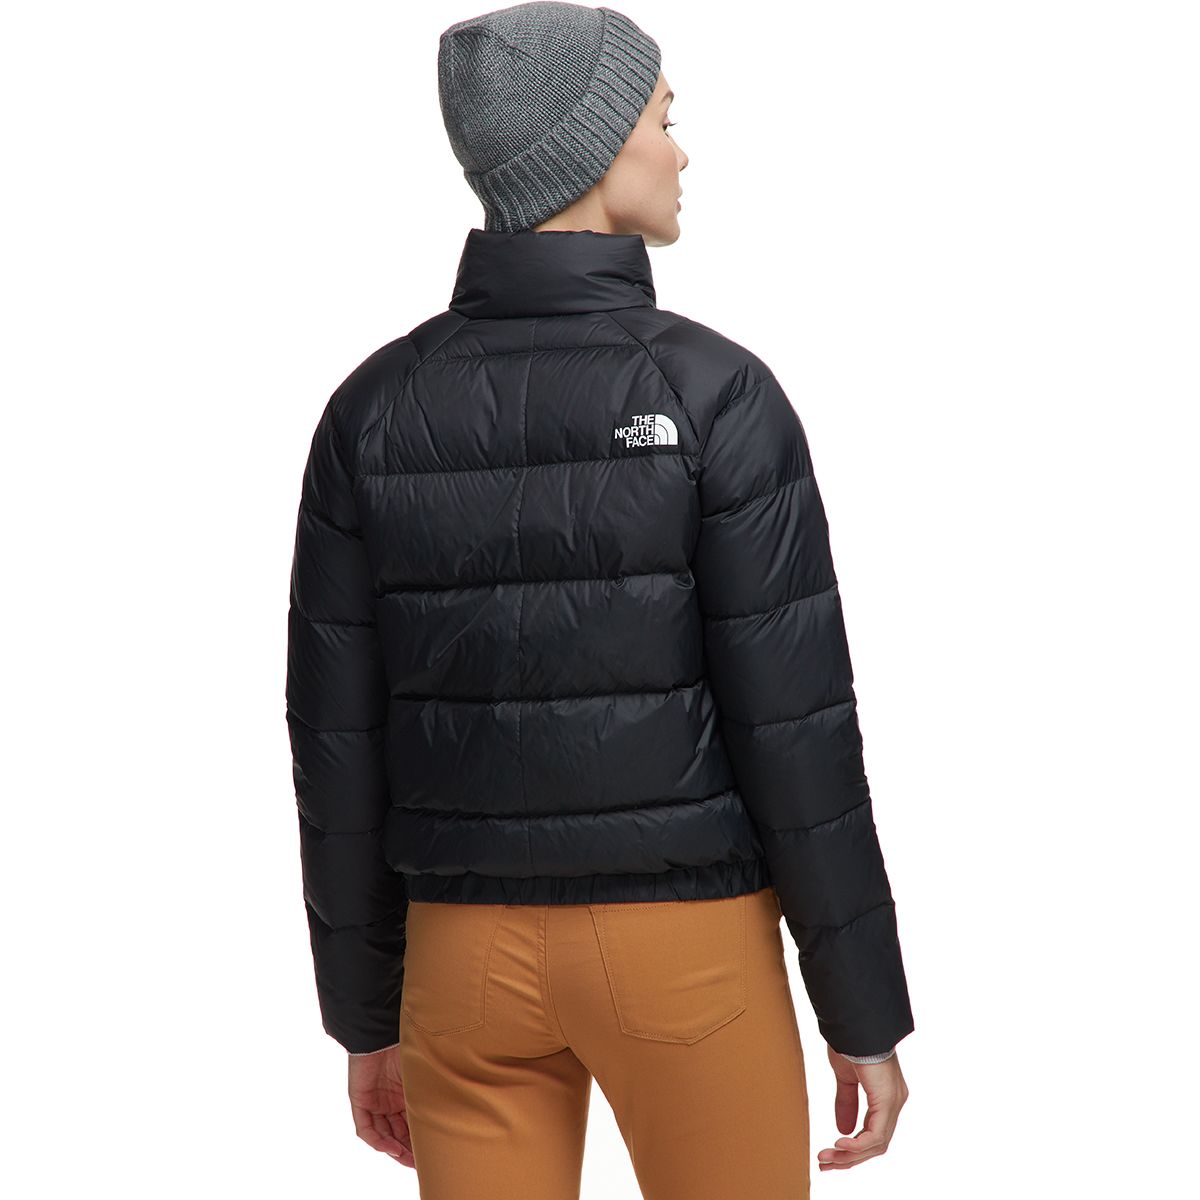 The North Face Hyalite Down Jacket - Women's | Backcountry.com